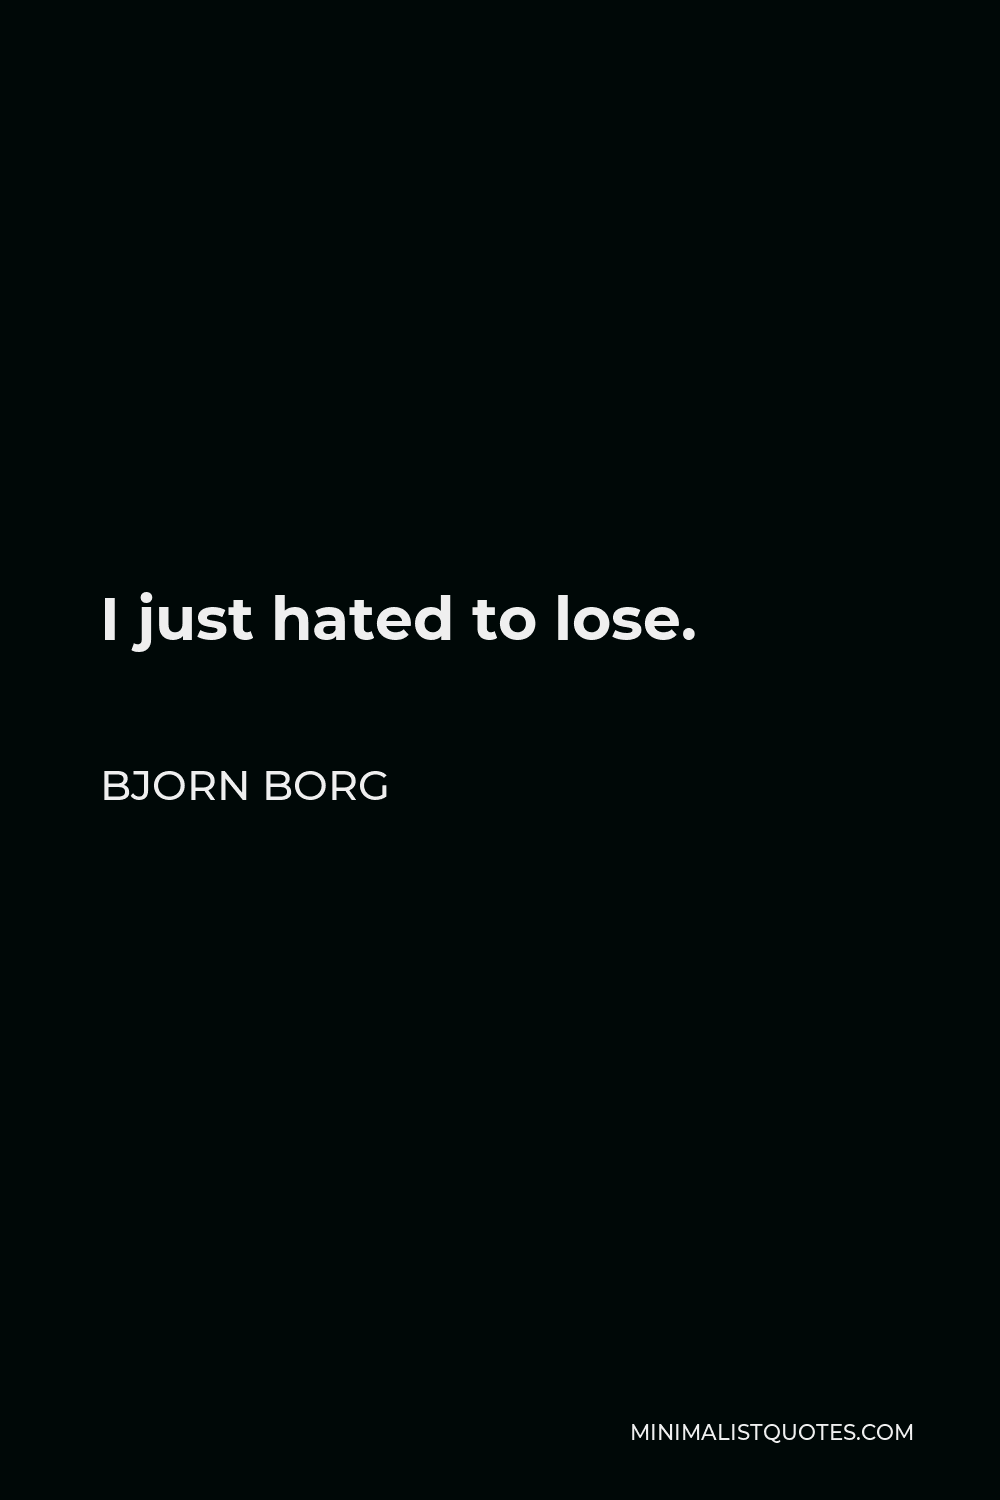 Bjorn Borg Quote - I just hated to lose.